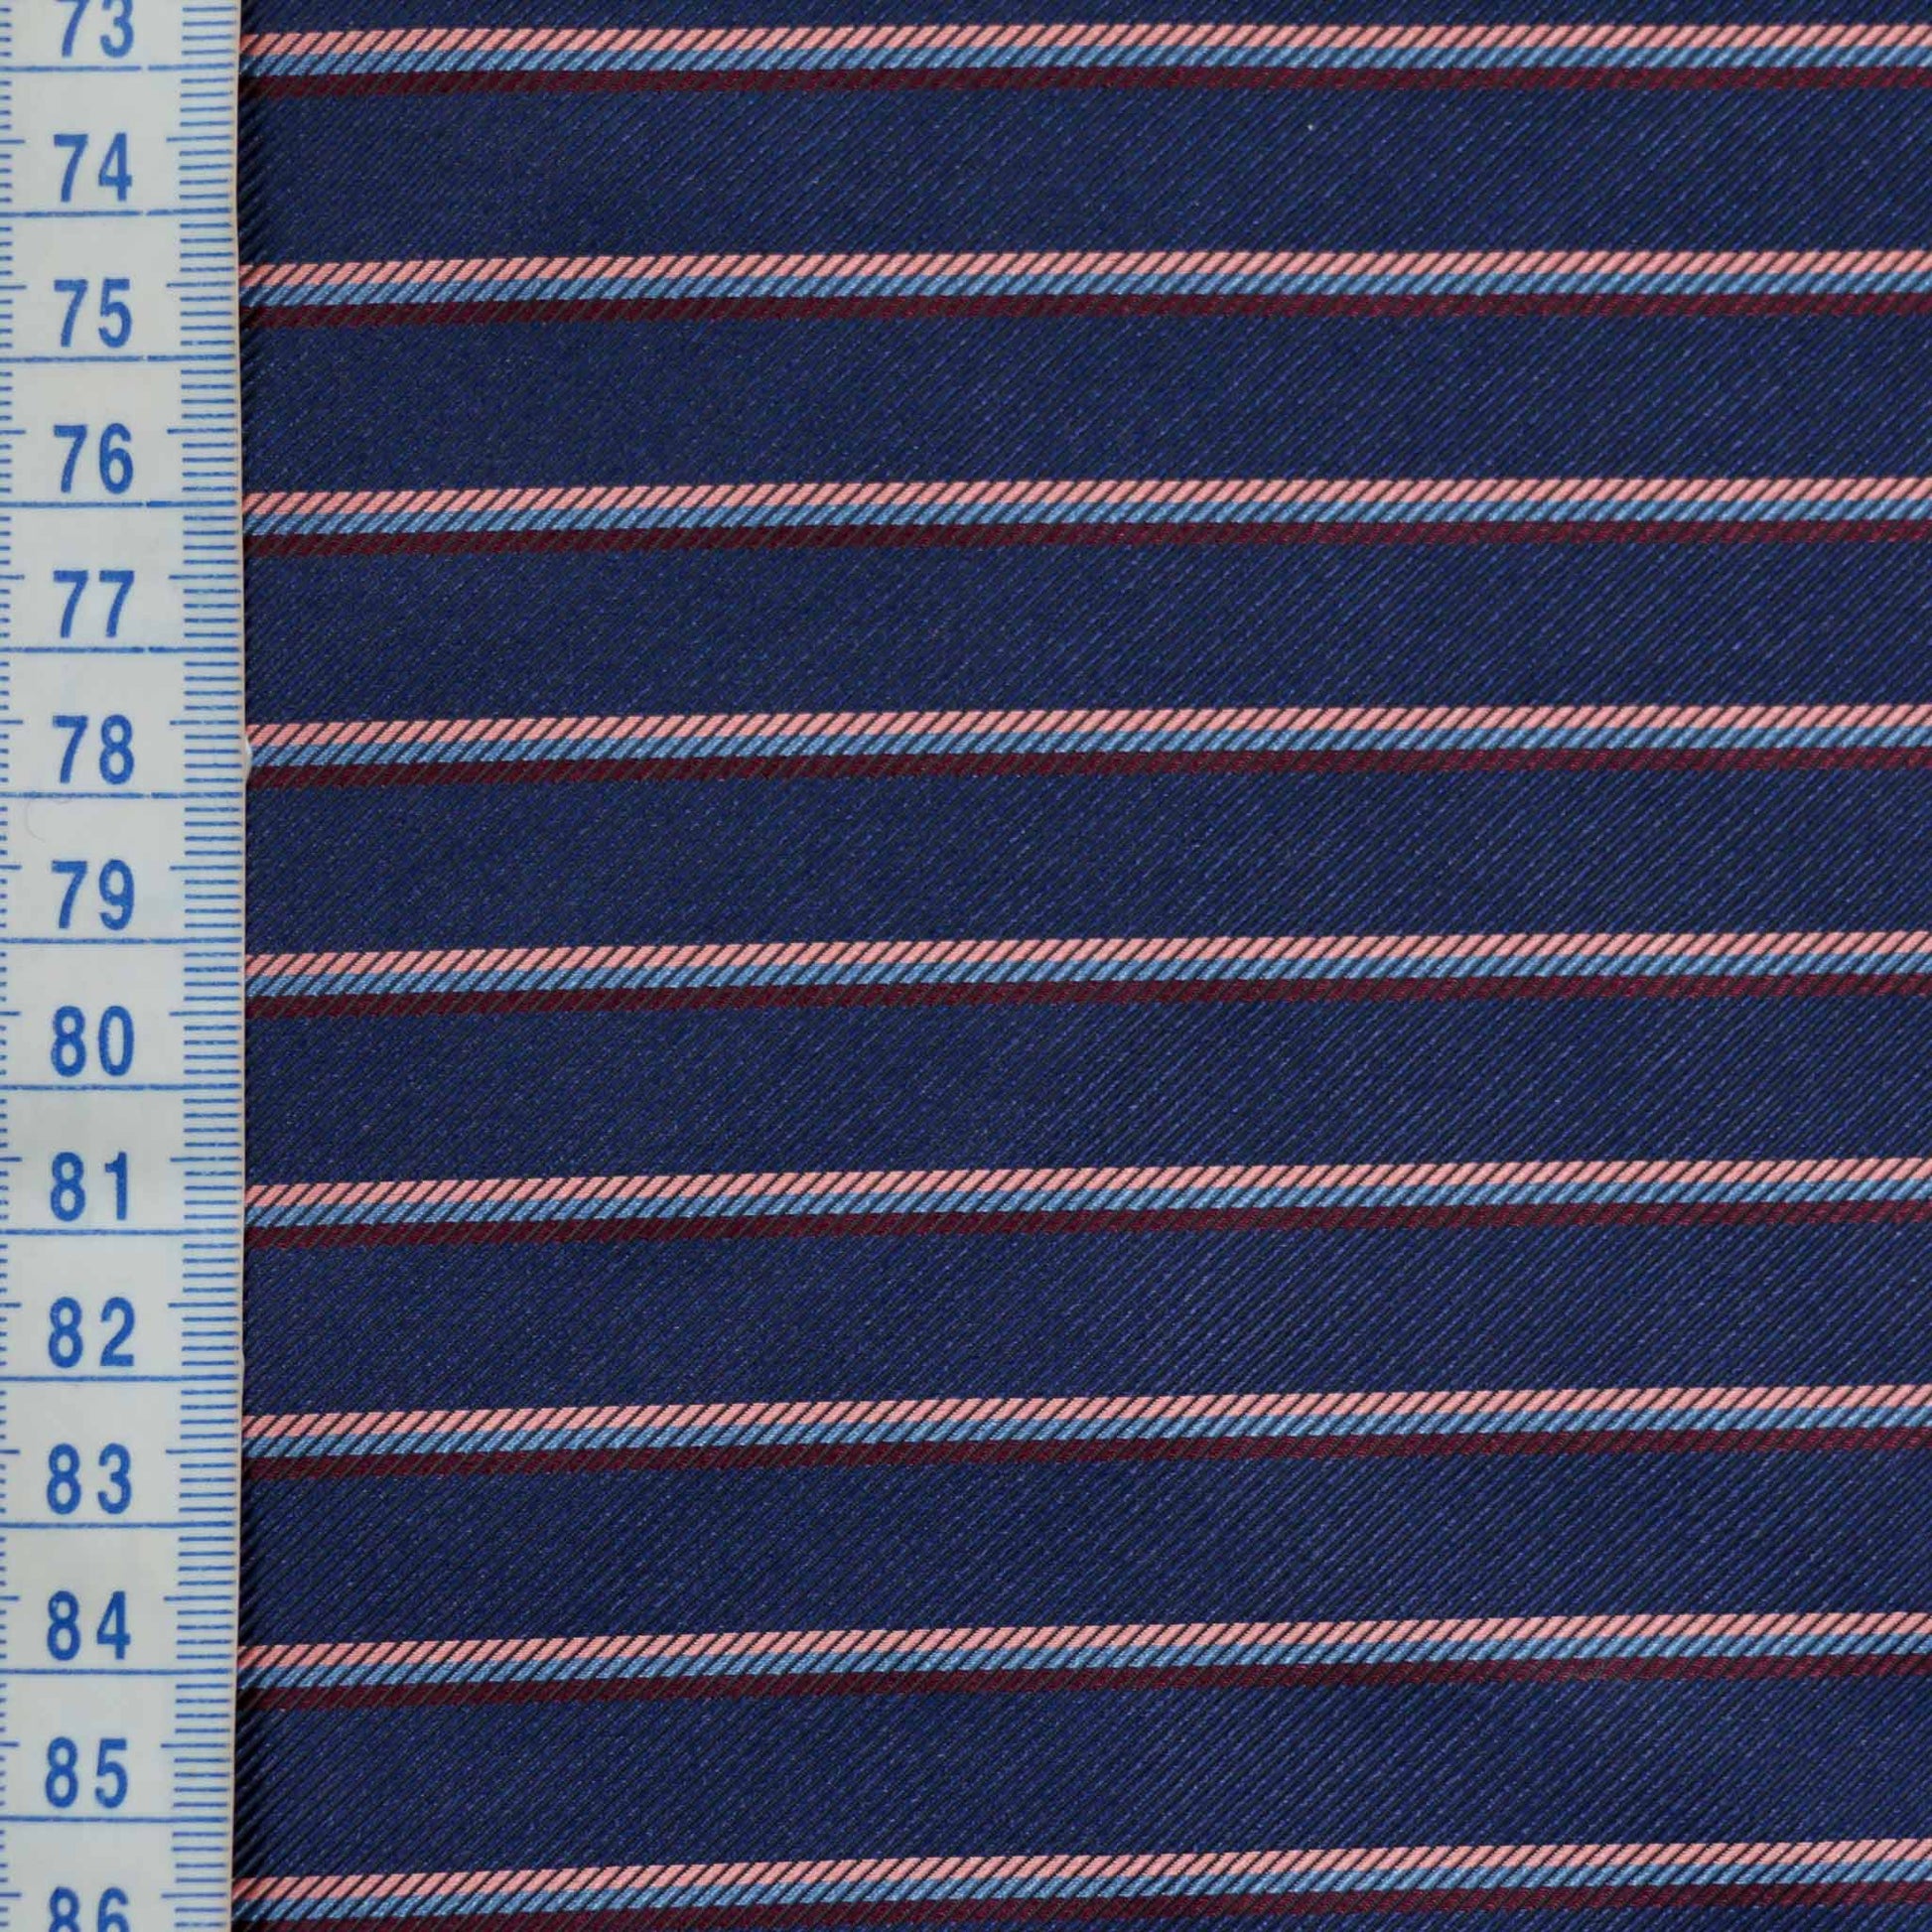 metre twill lining viscose dressmaking lining fabric in navy with pink and maroon striped design